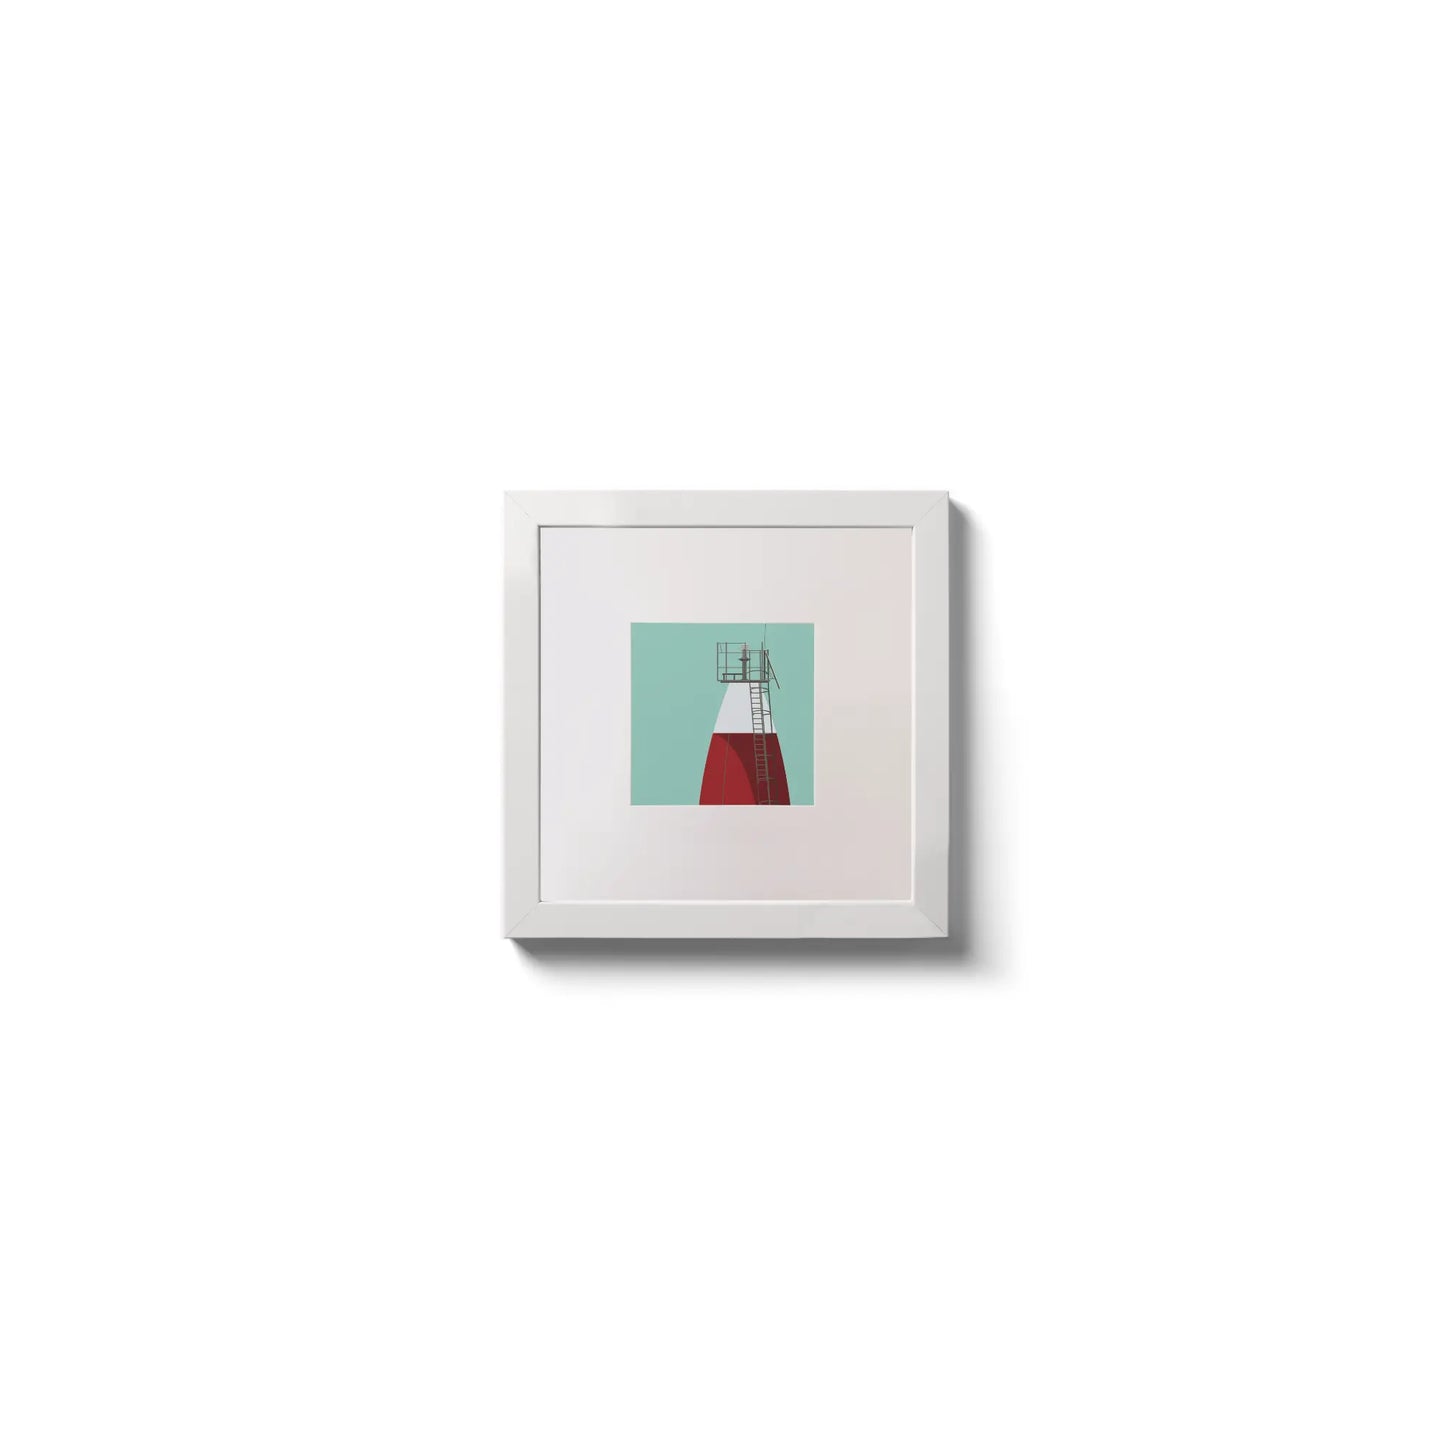 Illustration Muglins lighthouse on an ocean green background,  in a white square frame measuring 10x10cm.